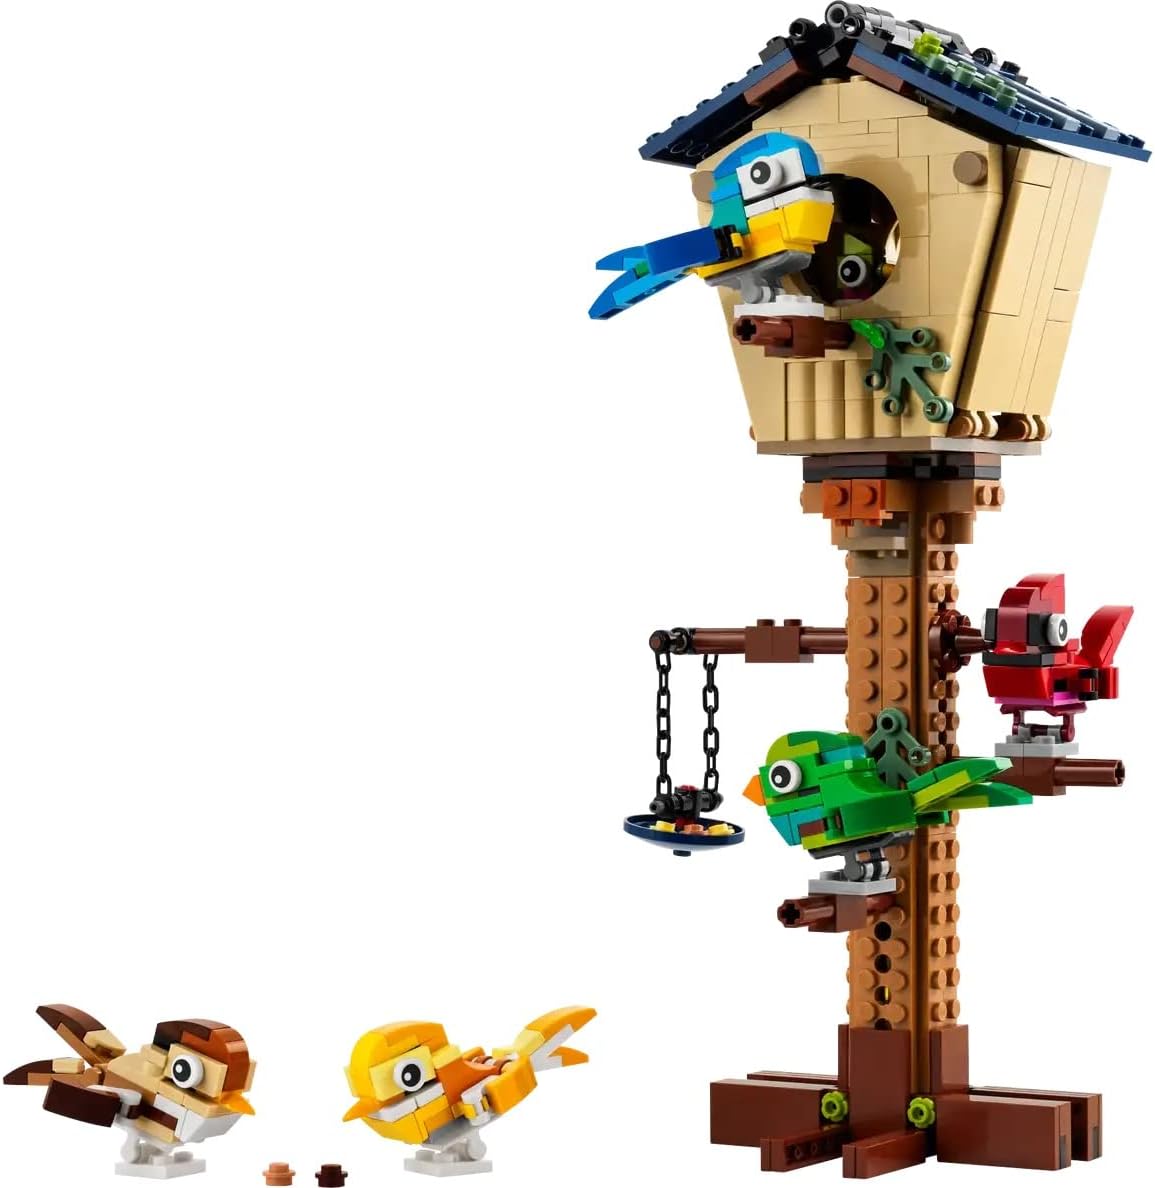 LEGO Creator 3In1 Birdhouse Building Kit for Ages 8+